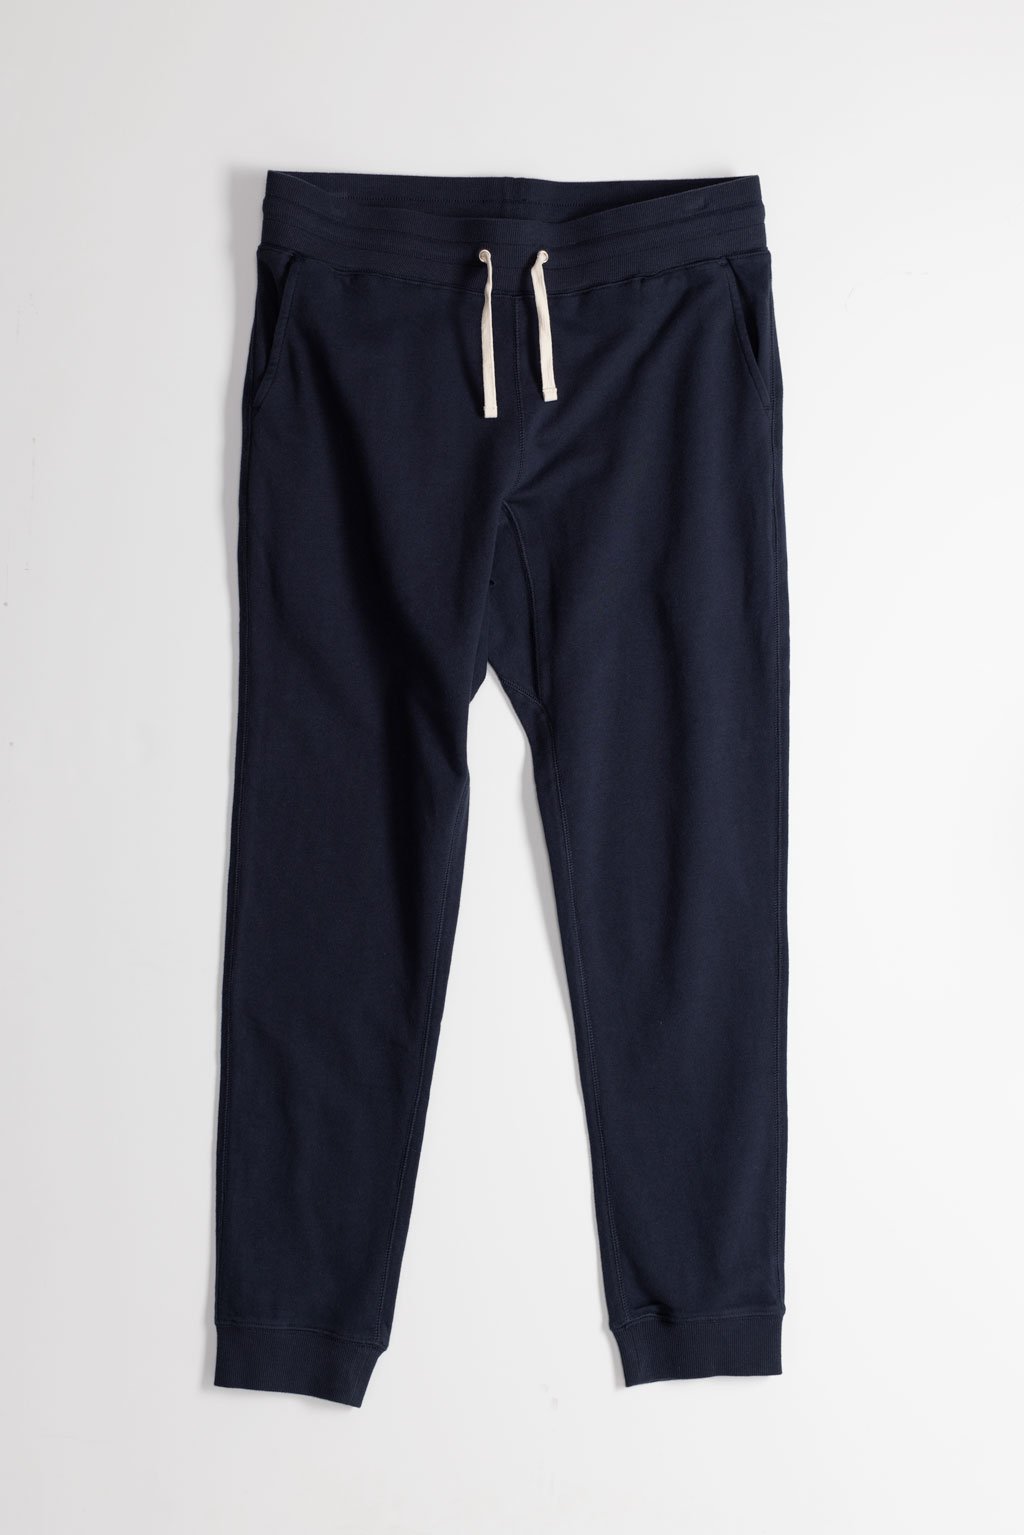 NS2167-2 250g French Terry Sweatpants in Navy – National Standards